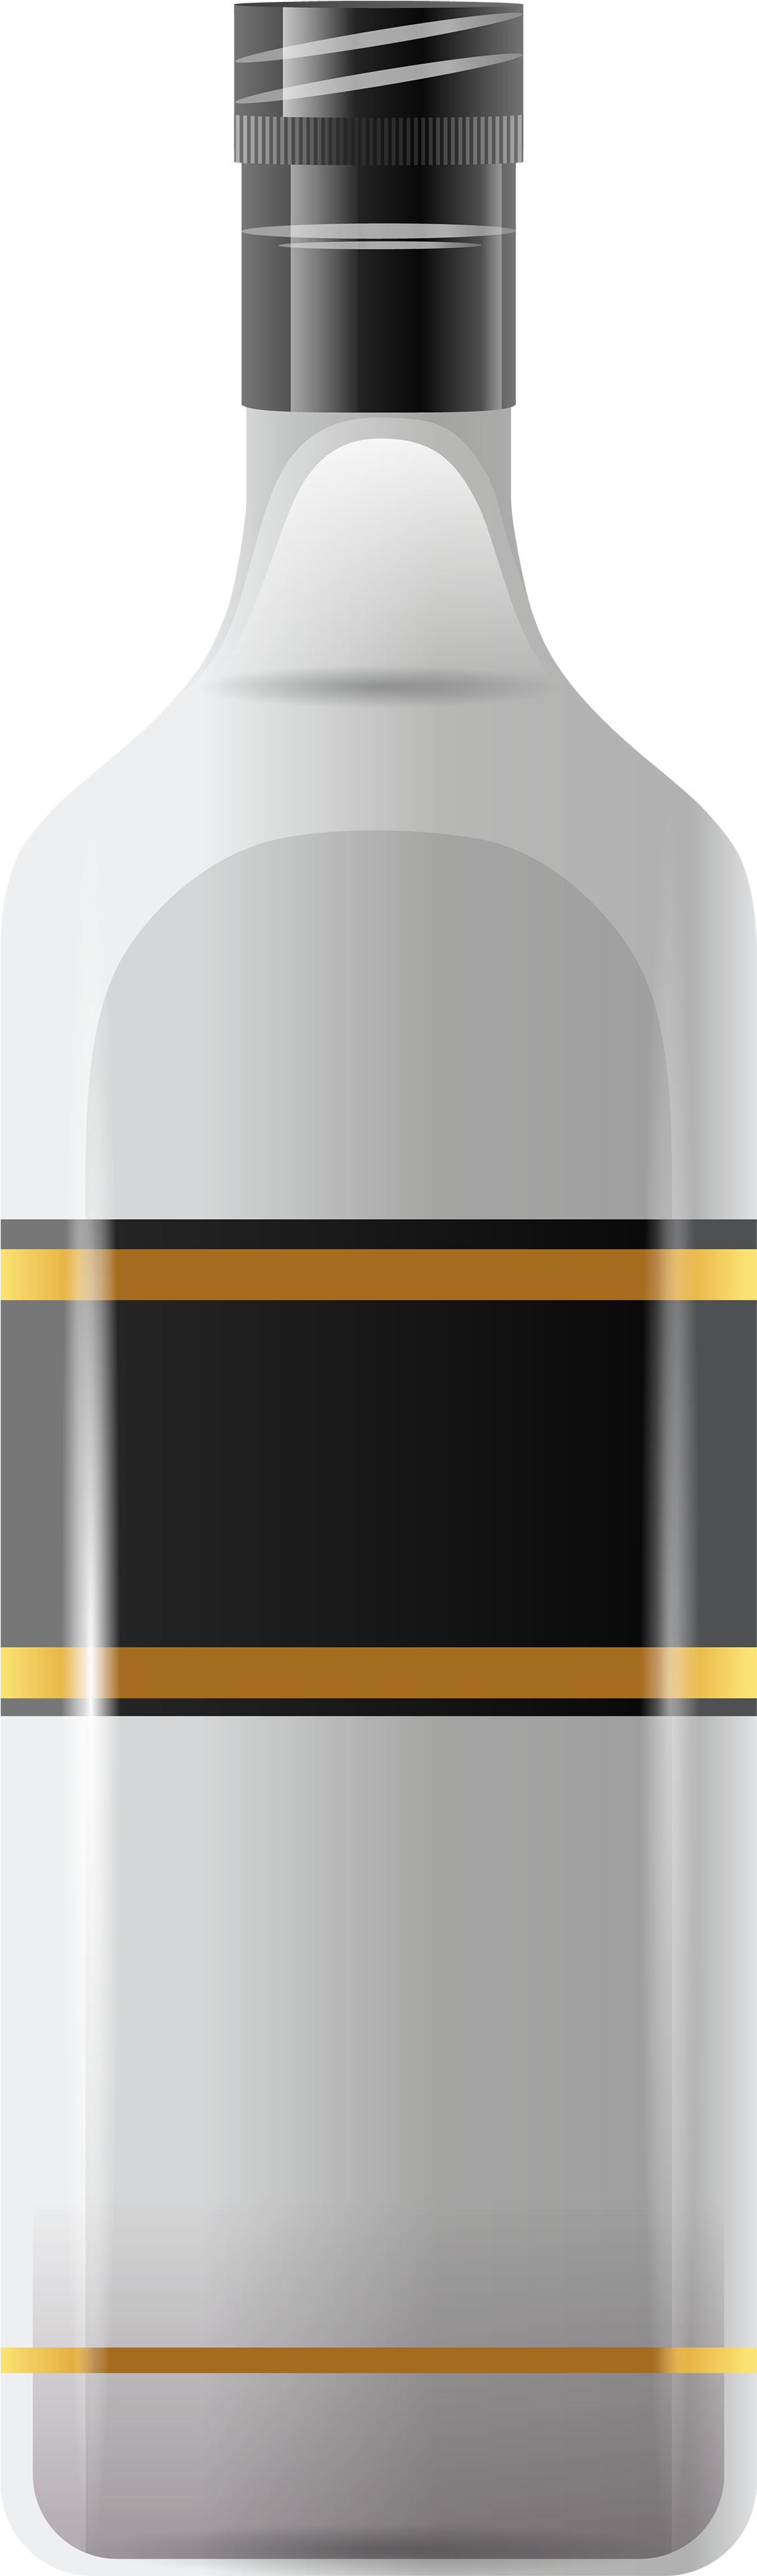 Unlabeled Whiskey Bottle Graphic PNG